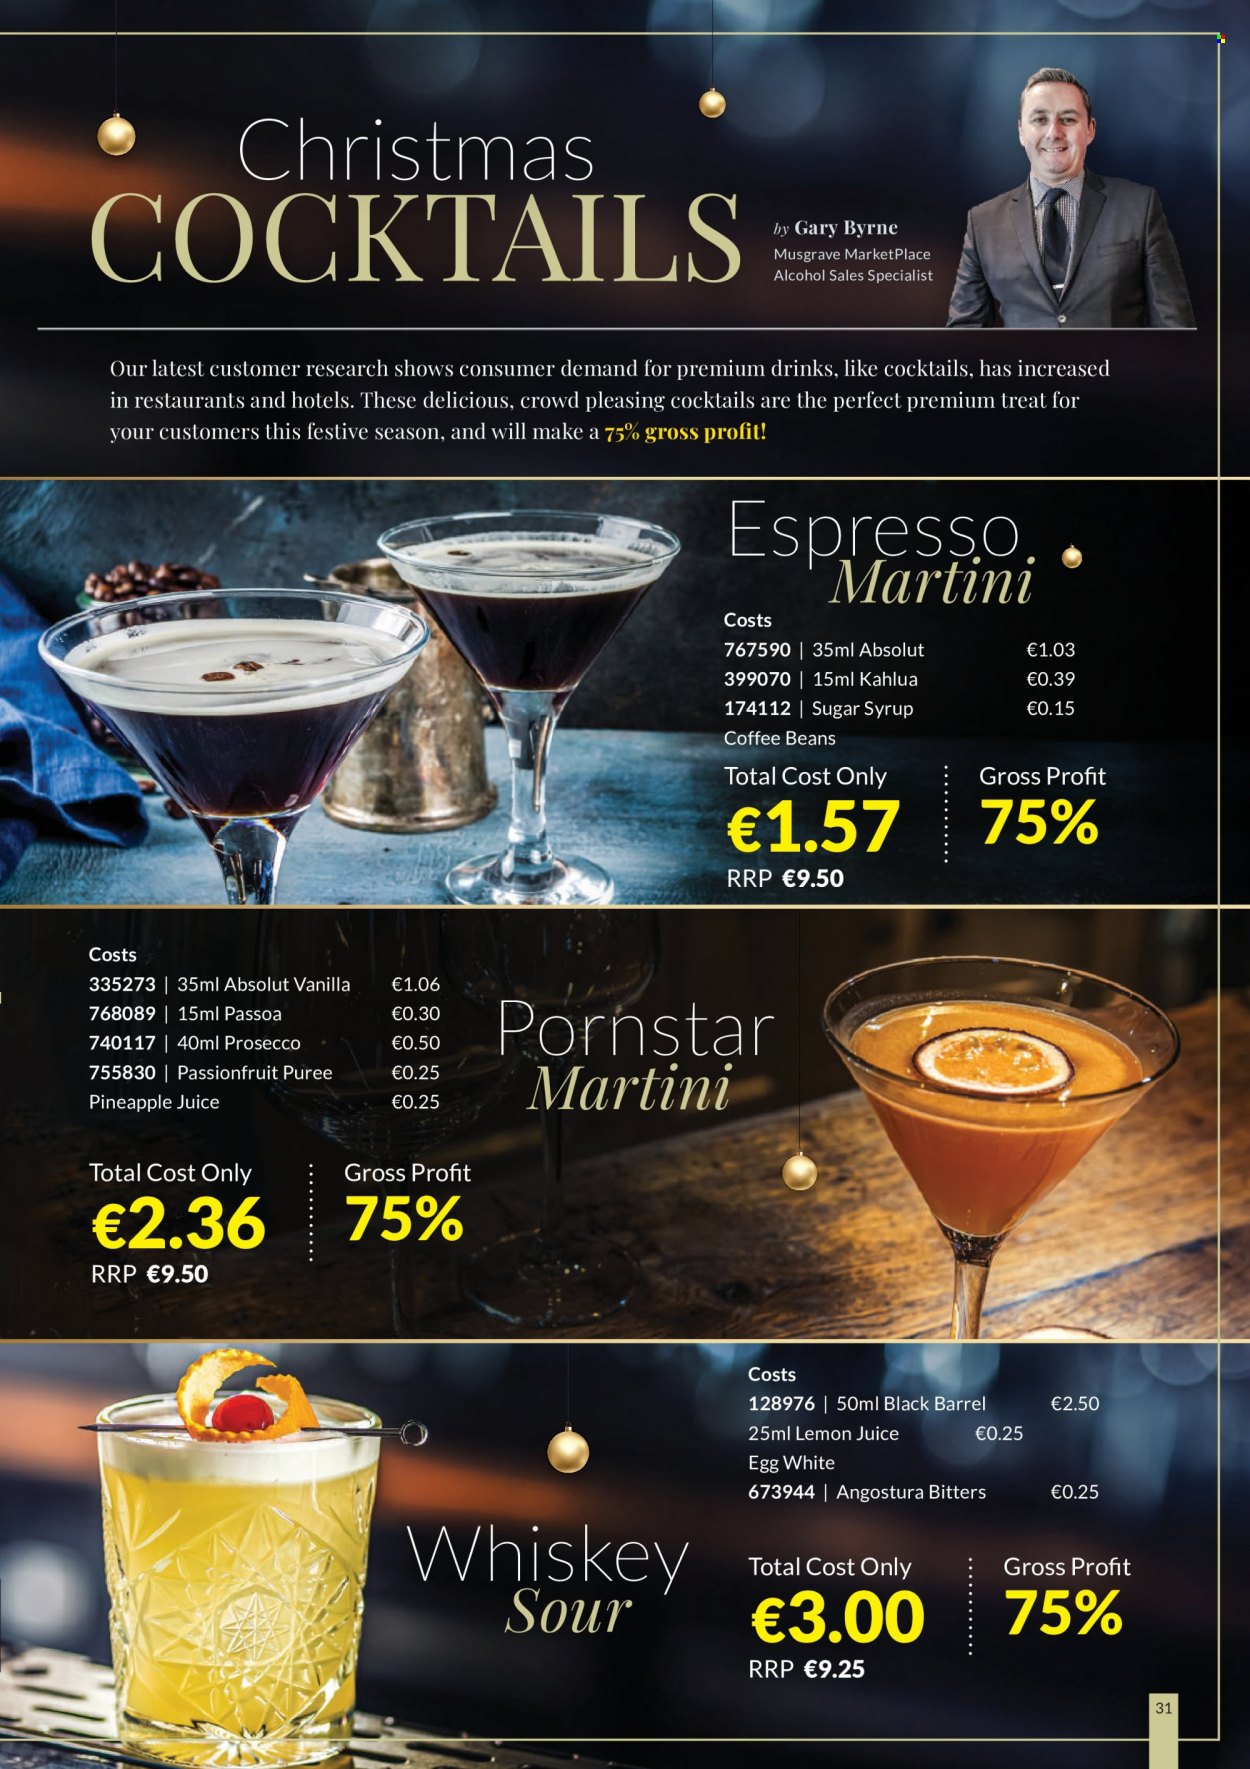 thumbnail - MUSGRAVE Market Place offer  - Sales products - pineapple, eggs, sugar, syrup, pineapple juice, lemon juice, Kahlúa, coffee beans, prosecco, alcohol, whiskey, Absolut, Martini, whisky. Page 31.